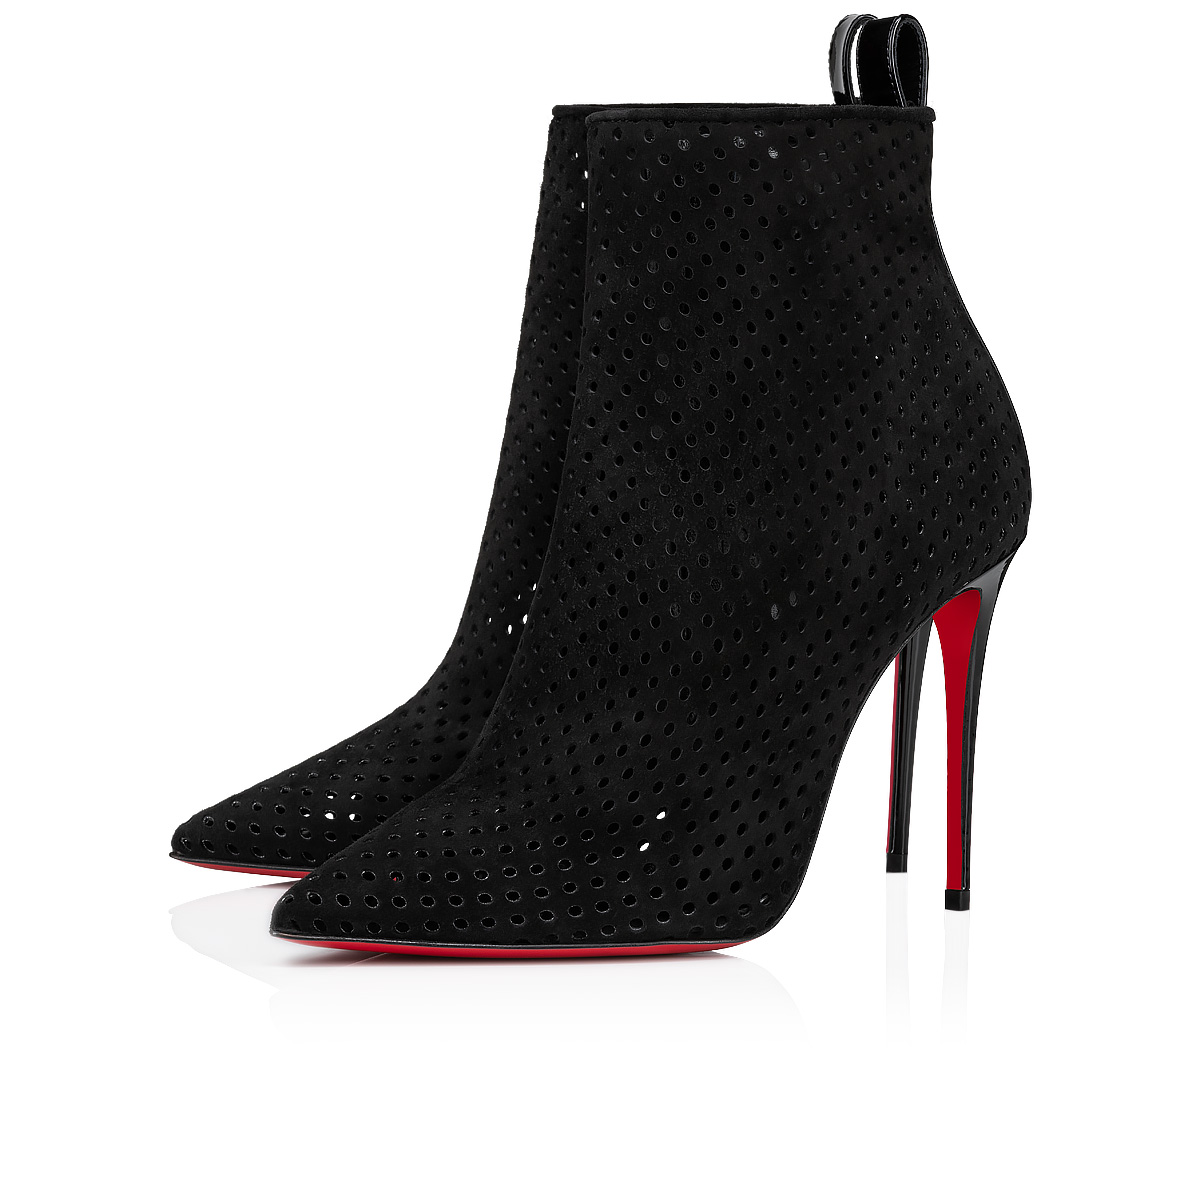 So Kate Booty - 85 mm Low boots - Calf leather - Black - Christian Louboutin